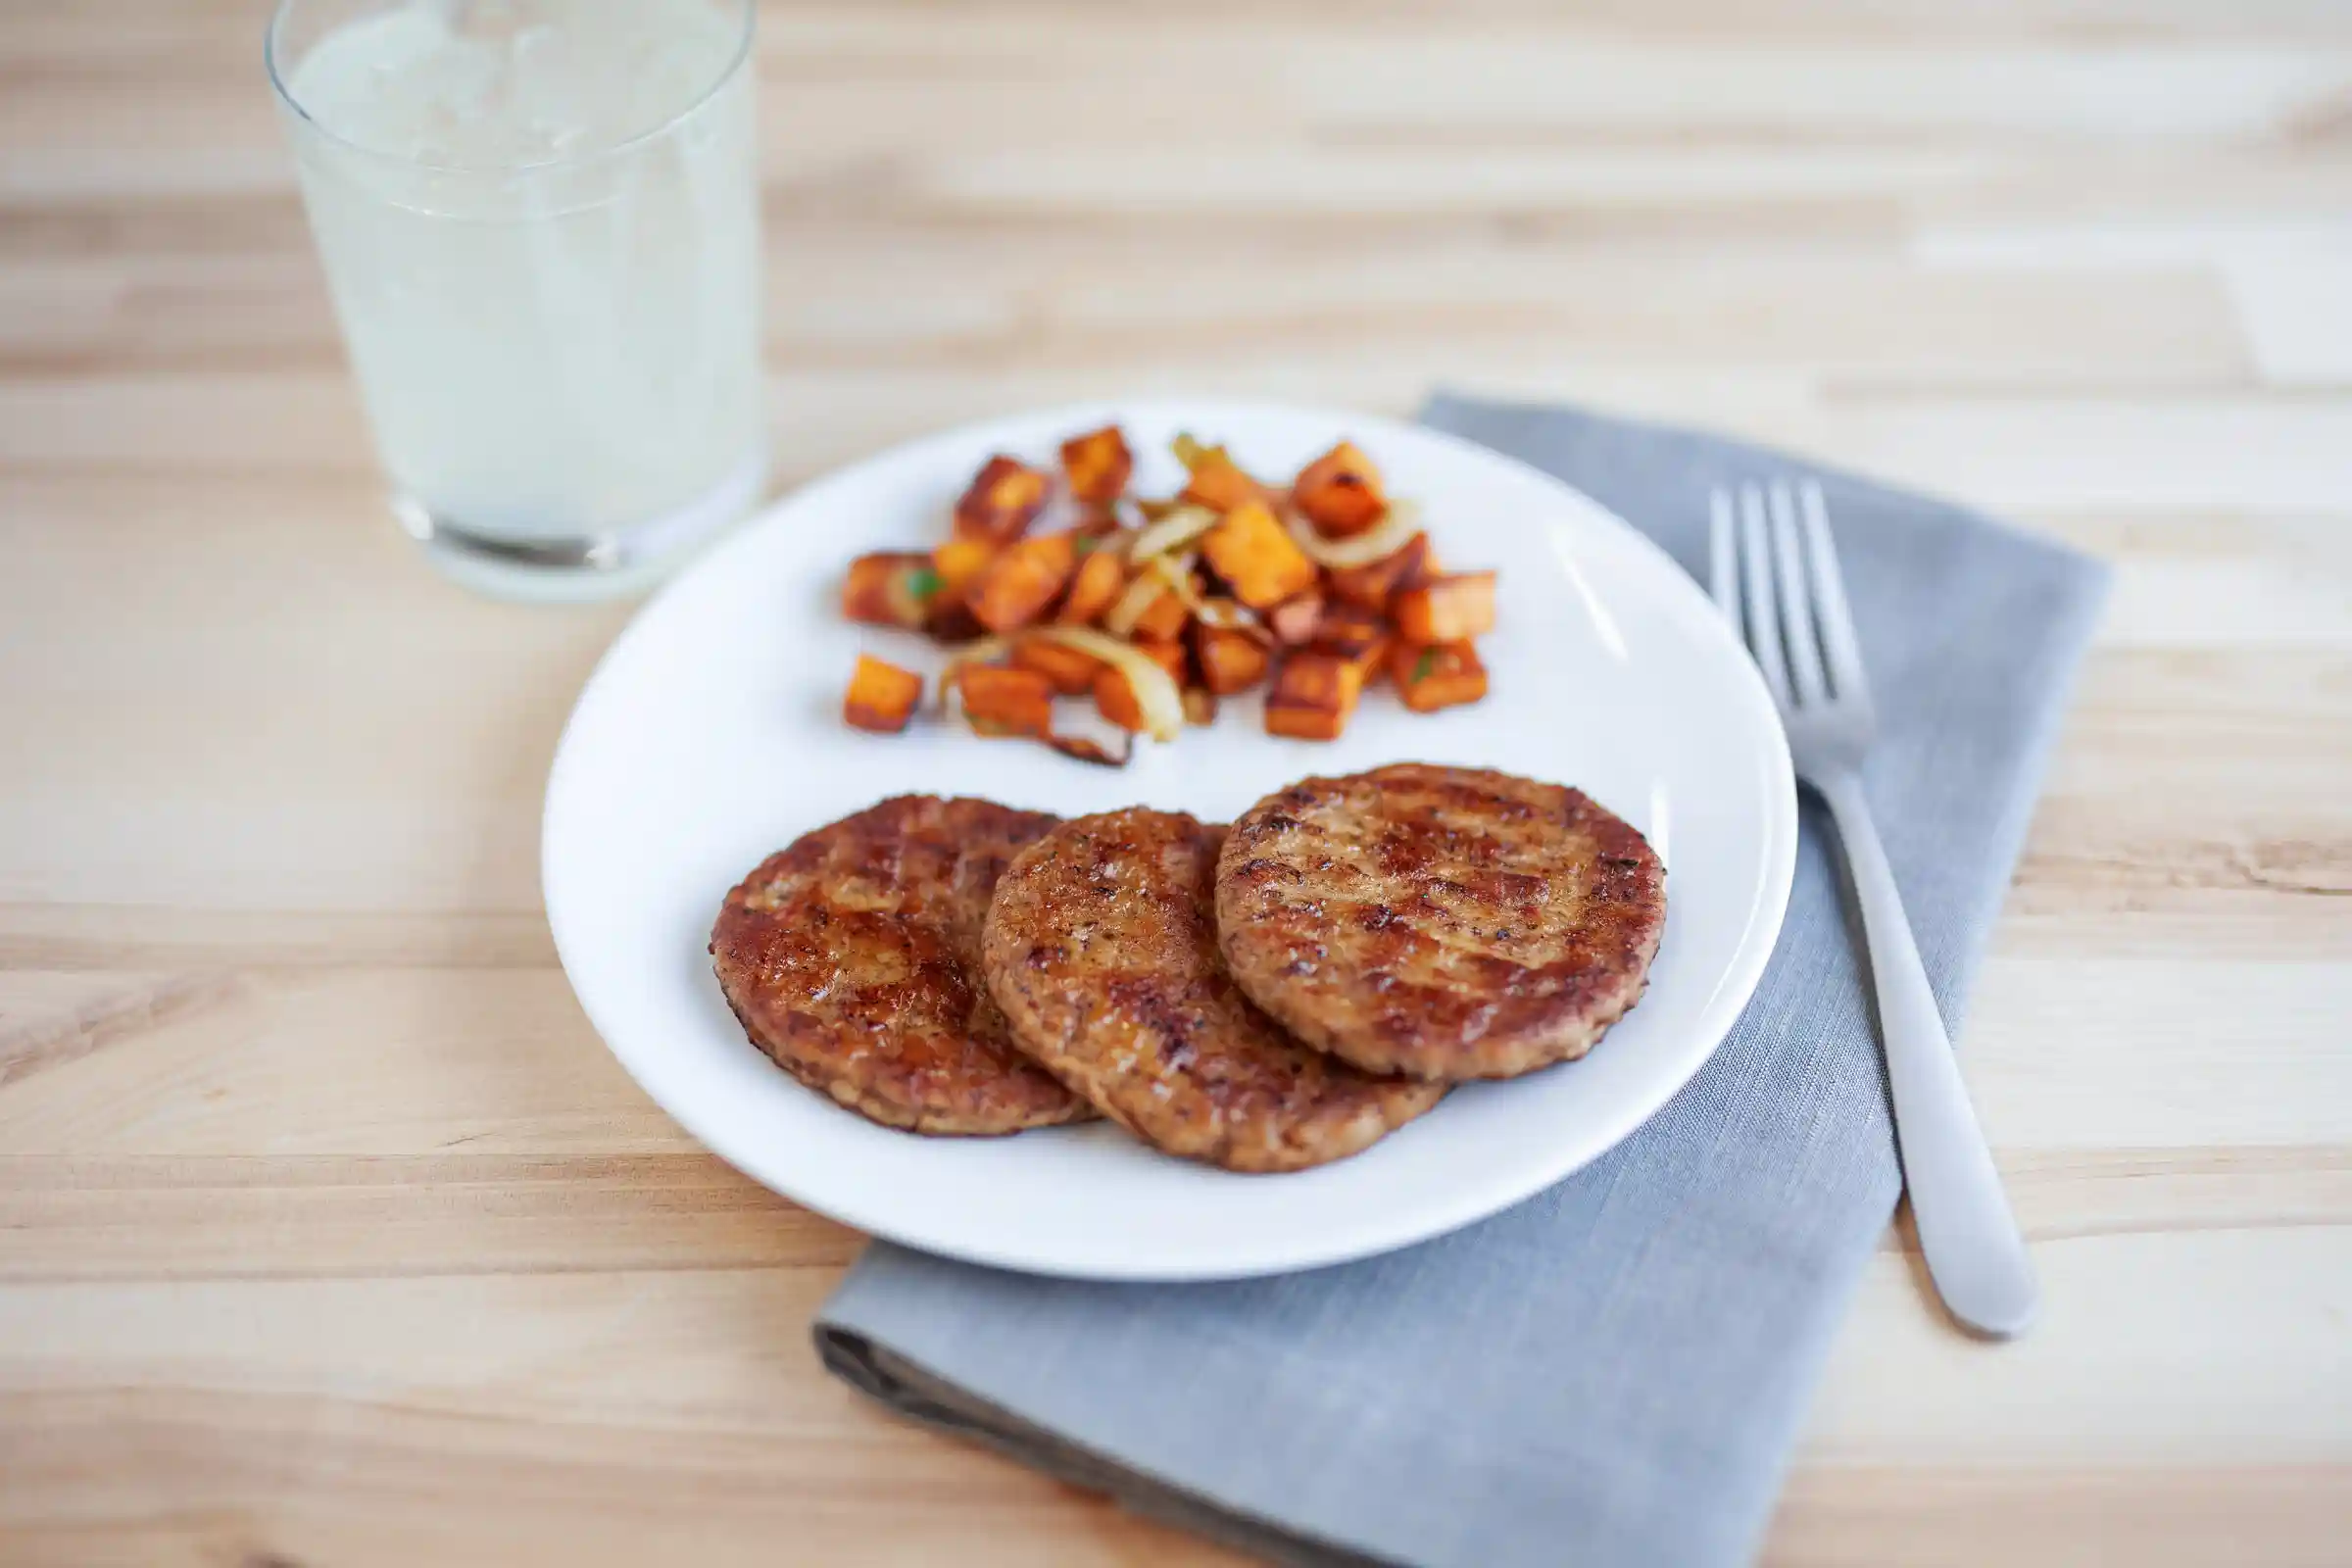 Jimmy Dean® Fully Cooked Pork Sausage Patties, 3.75 Inch, 1.5 ozhttps://images.salsify.com/image/upload/s--_tRuJgfh--/q_25/kgqrbiuzixebyyzotnyc.webp